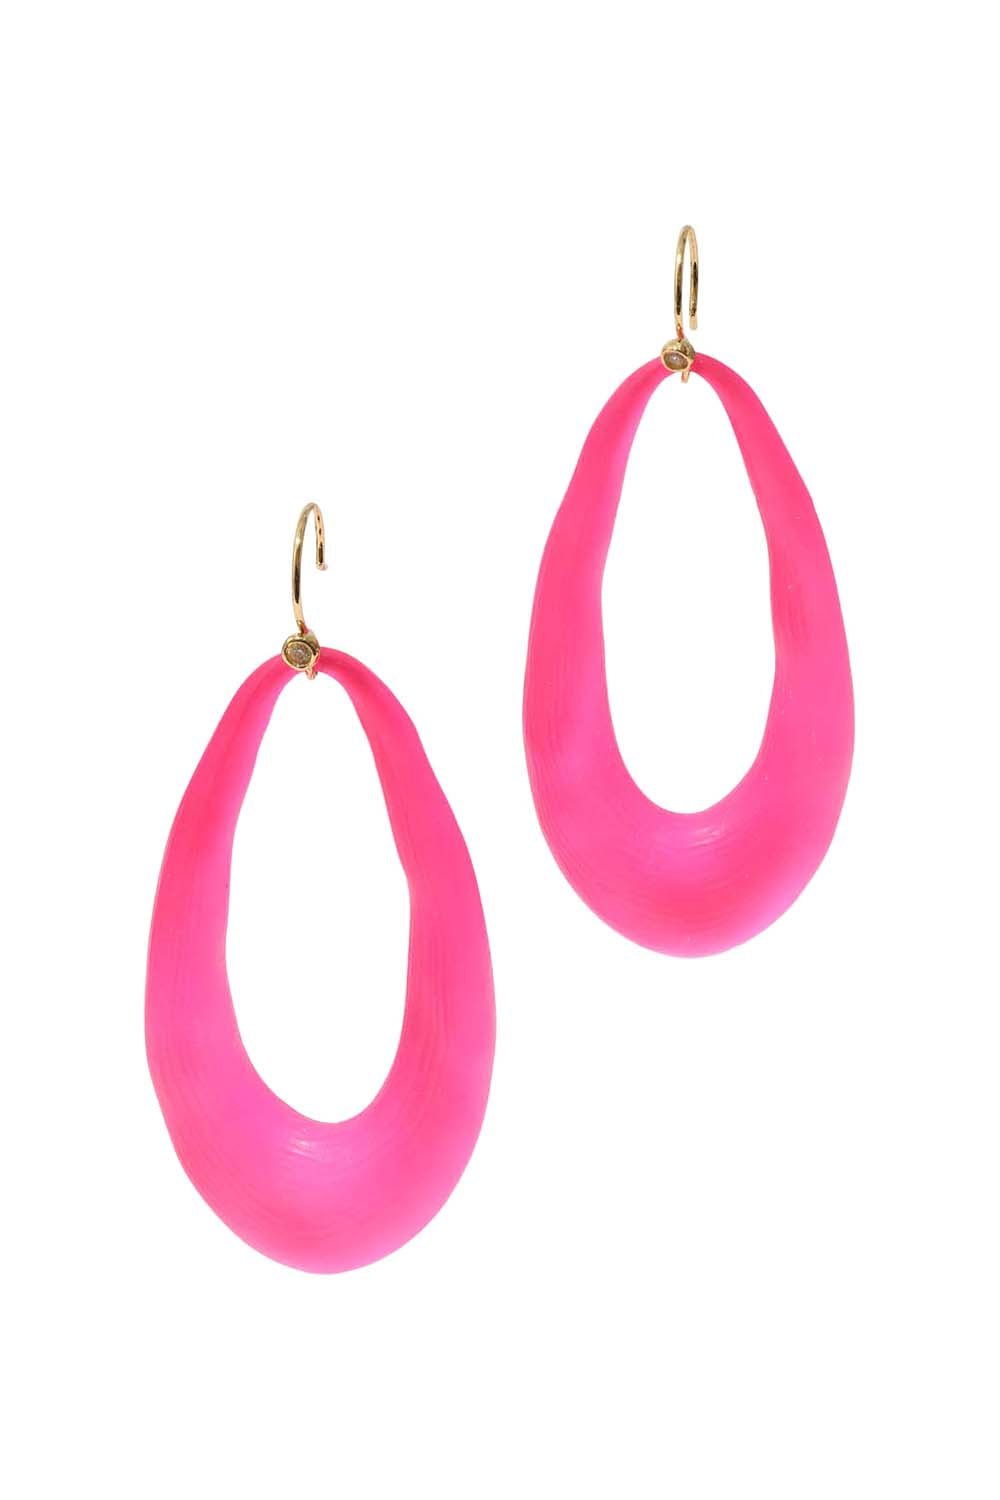 ALEXIS BITTAR-Lucite Link Wire Earrings - Neon Pink-NEON PINK